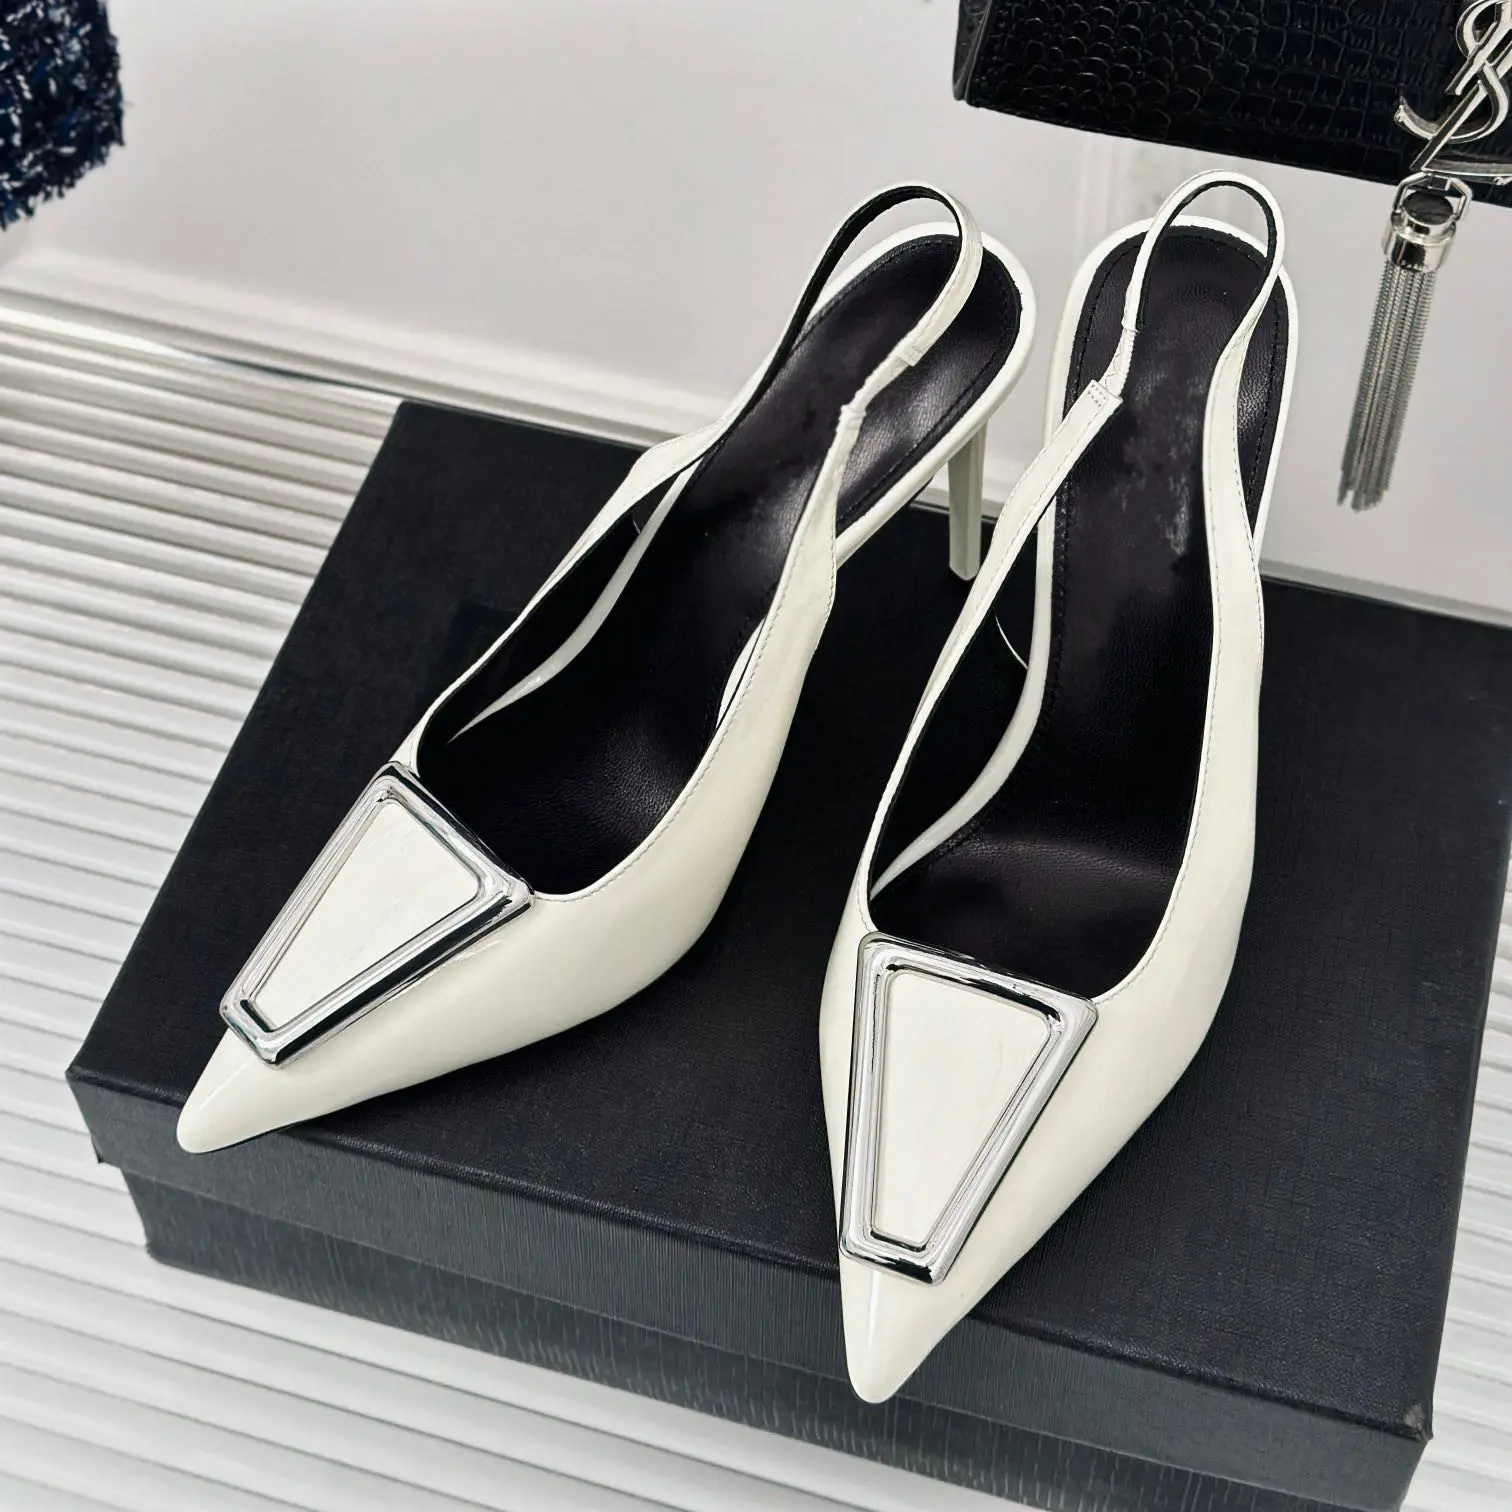 Casual Designer Fashion Women Shoes Sexy Lady White Patent Leather Strappy Pointy Toe High Heels Sandals Zapatos Mujer Sandals casual designer fashion women shoes brown genuine leather buckle peep toe sandals zapatos mujer mule summer slide soft leather